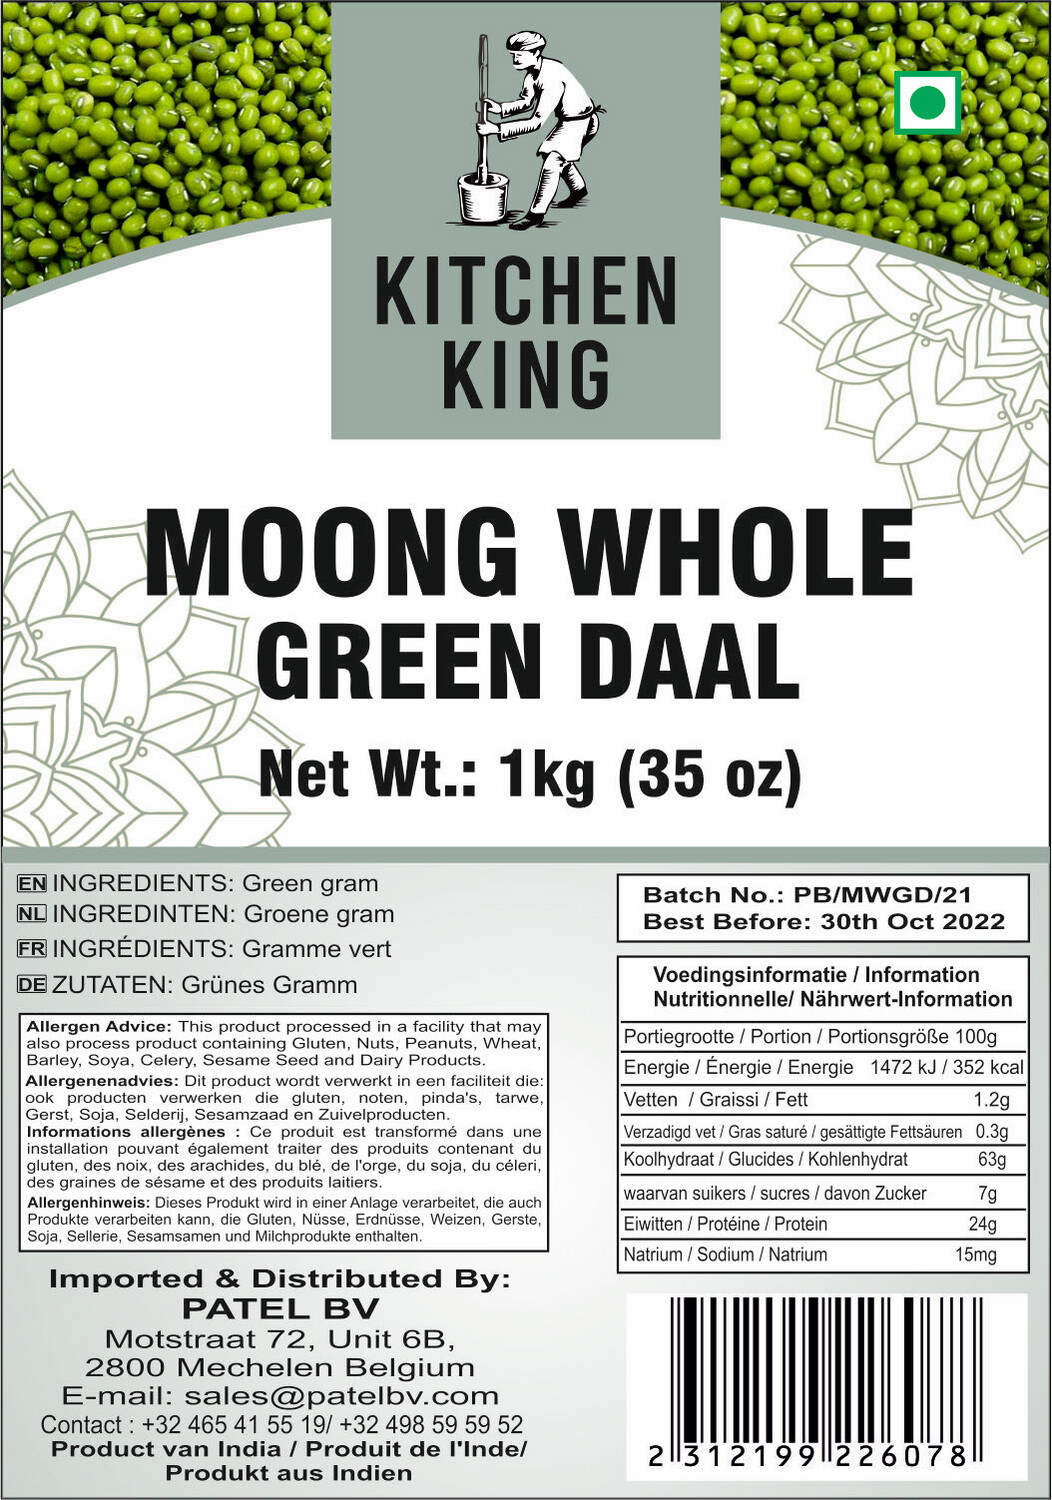 KITCHEN KING MOONG WHOLE 1KG